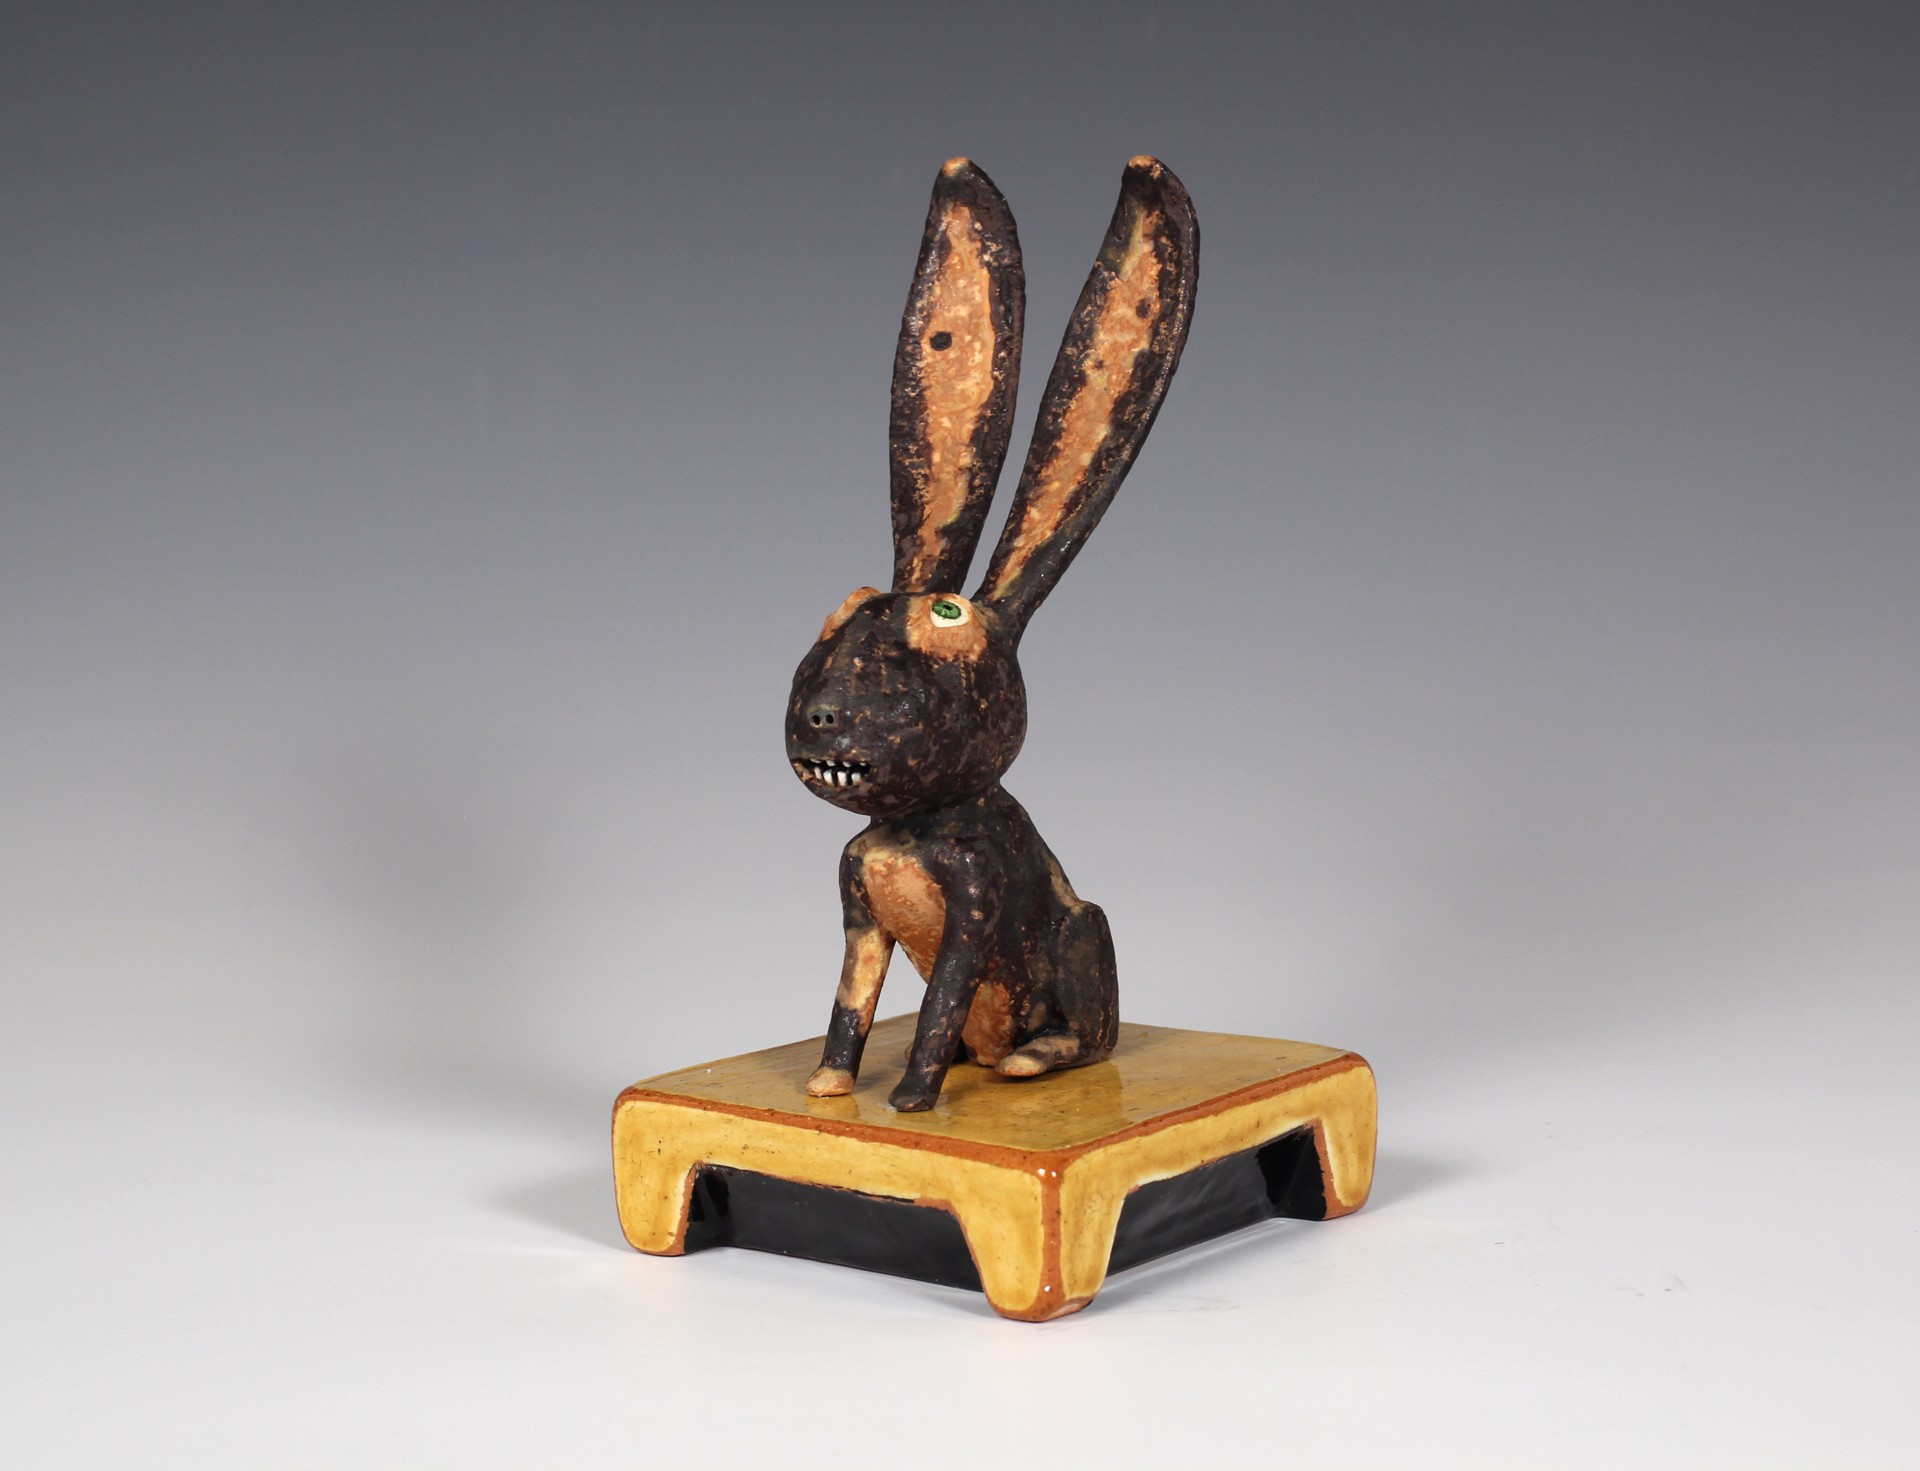 Black and Brown Rabbit with Yellow Base by Wesley Anderegg